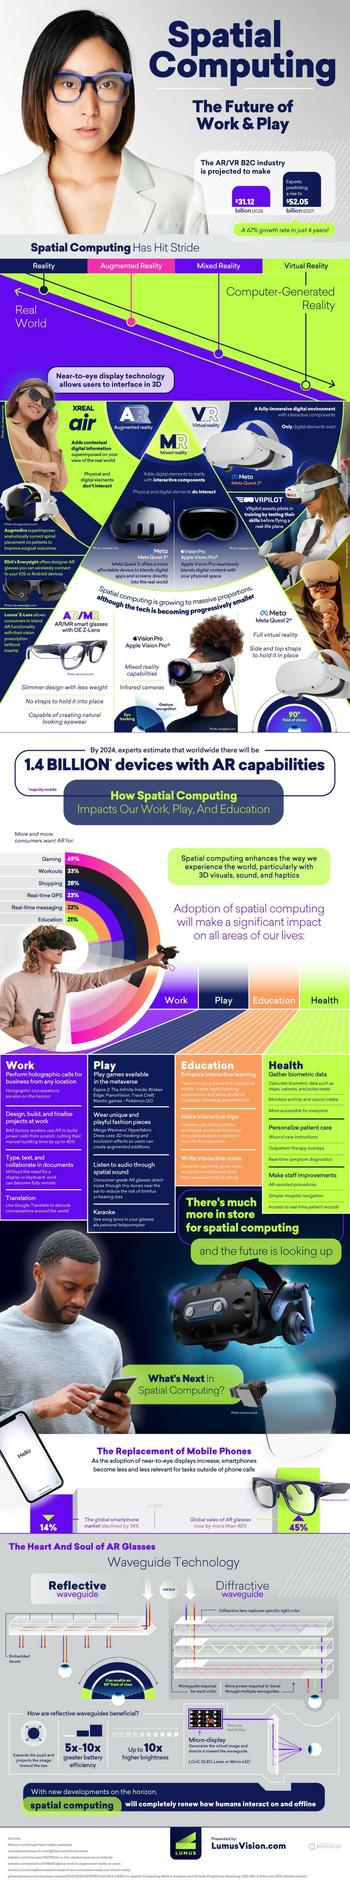 Spatial Computing Is Potentially A $50B Plus Industry: https://www.valuewalk.com/wp-content/uploads/2023/08/Spatial-Computing-IG.jpg